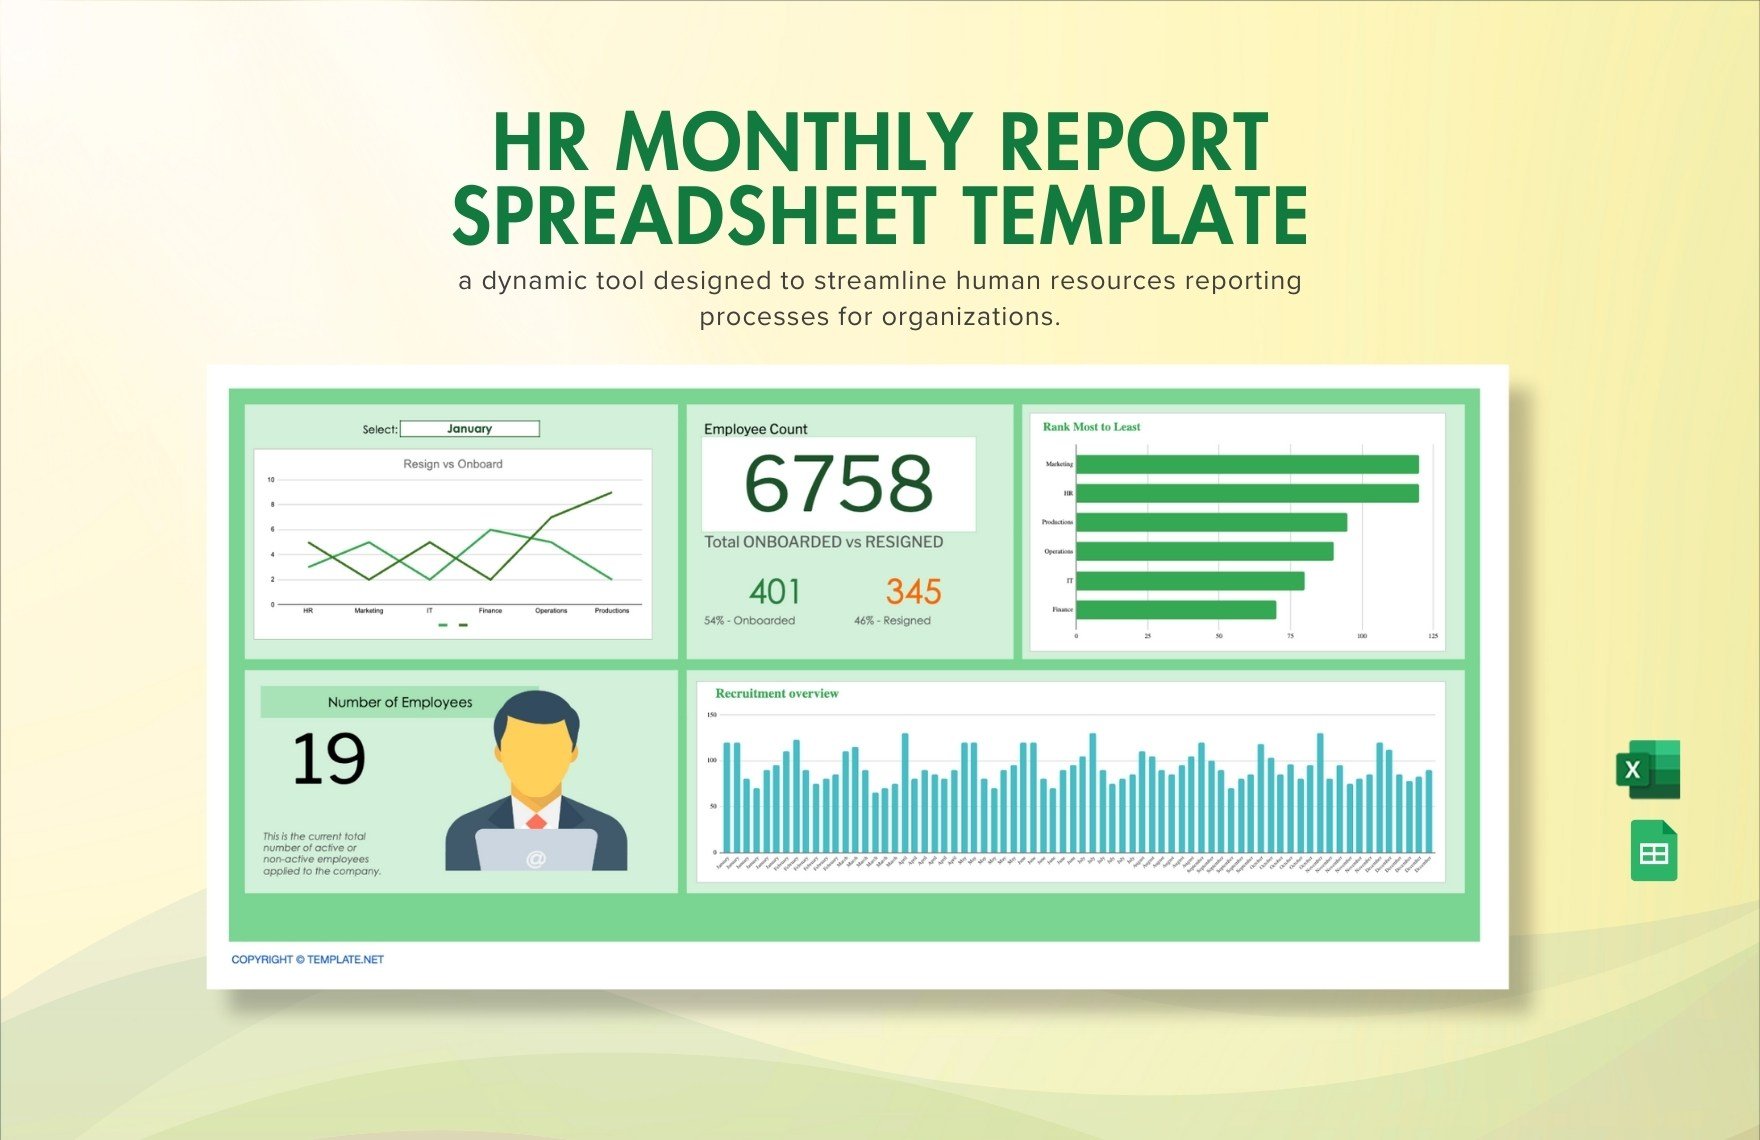 HR Monthly Report Spreadsheet Template in Excel, Google Sheets